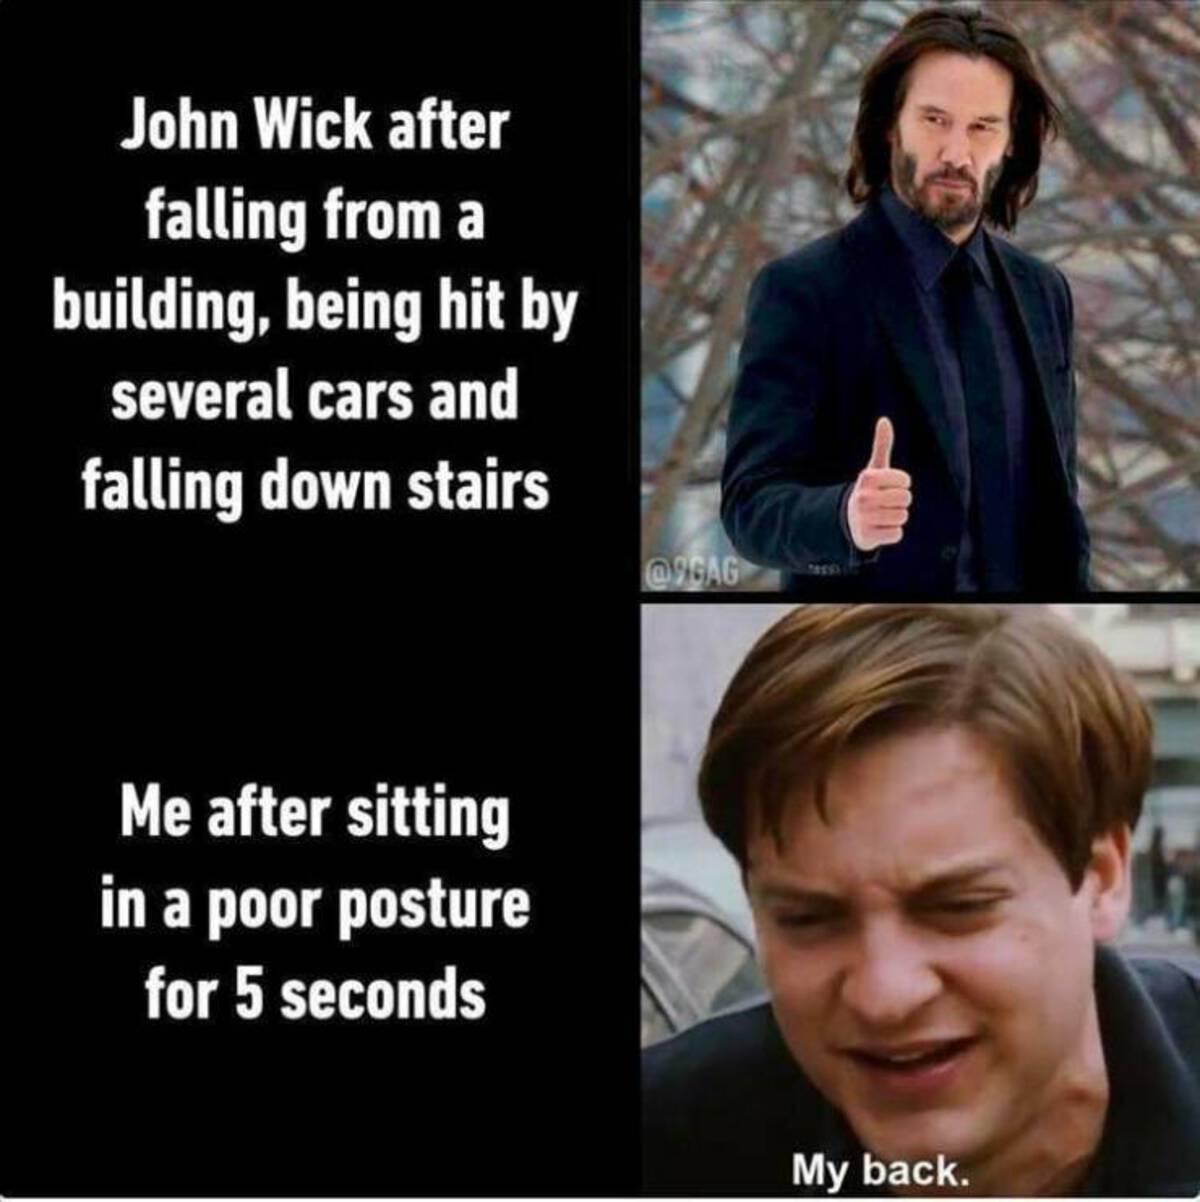 photo caption - John Wick after falling from a building, being hit by several cars and falling down stairs Me after sitting in a poor posture for 5 seconds My back.